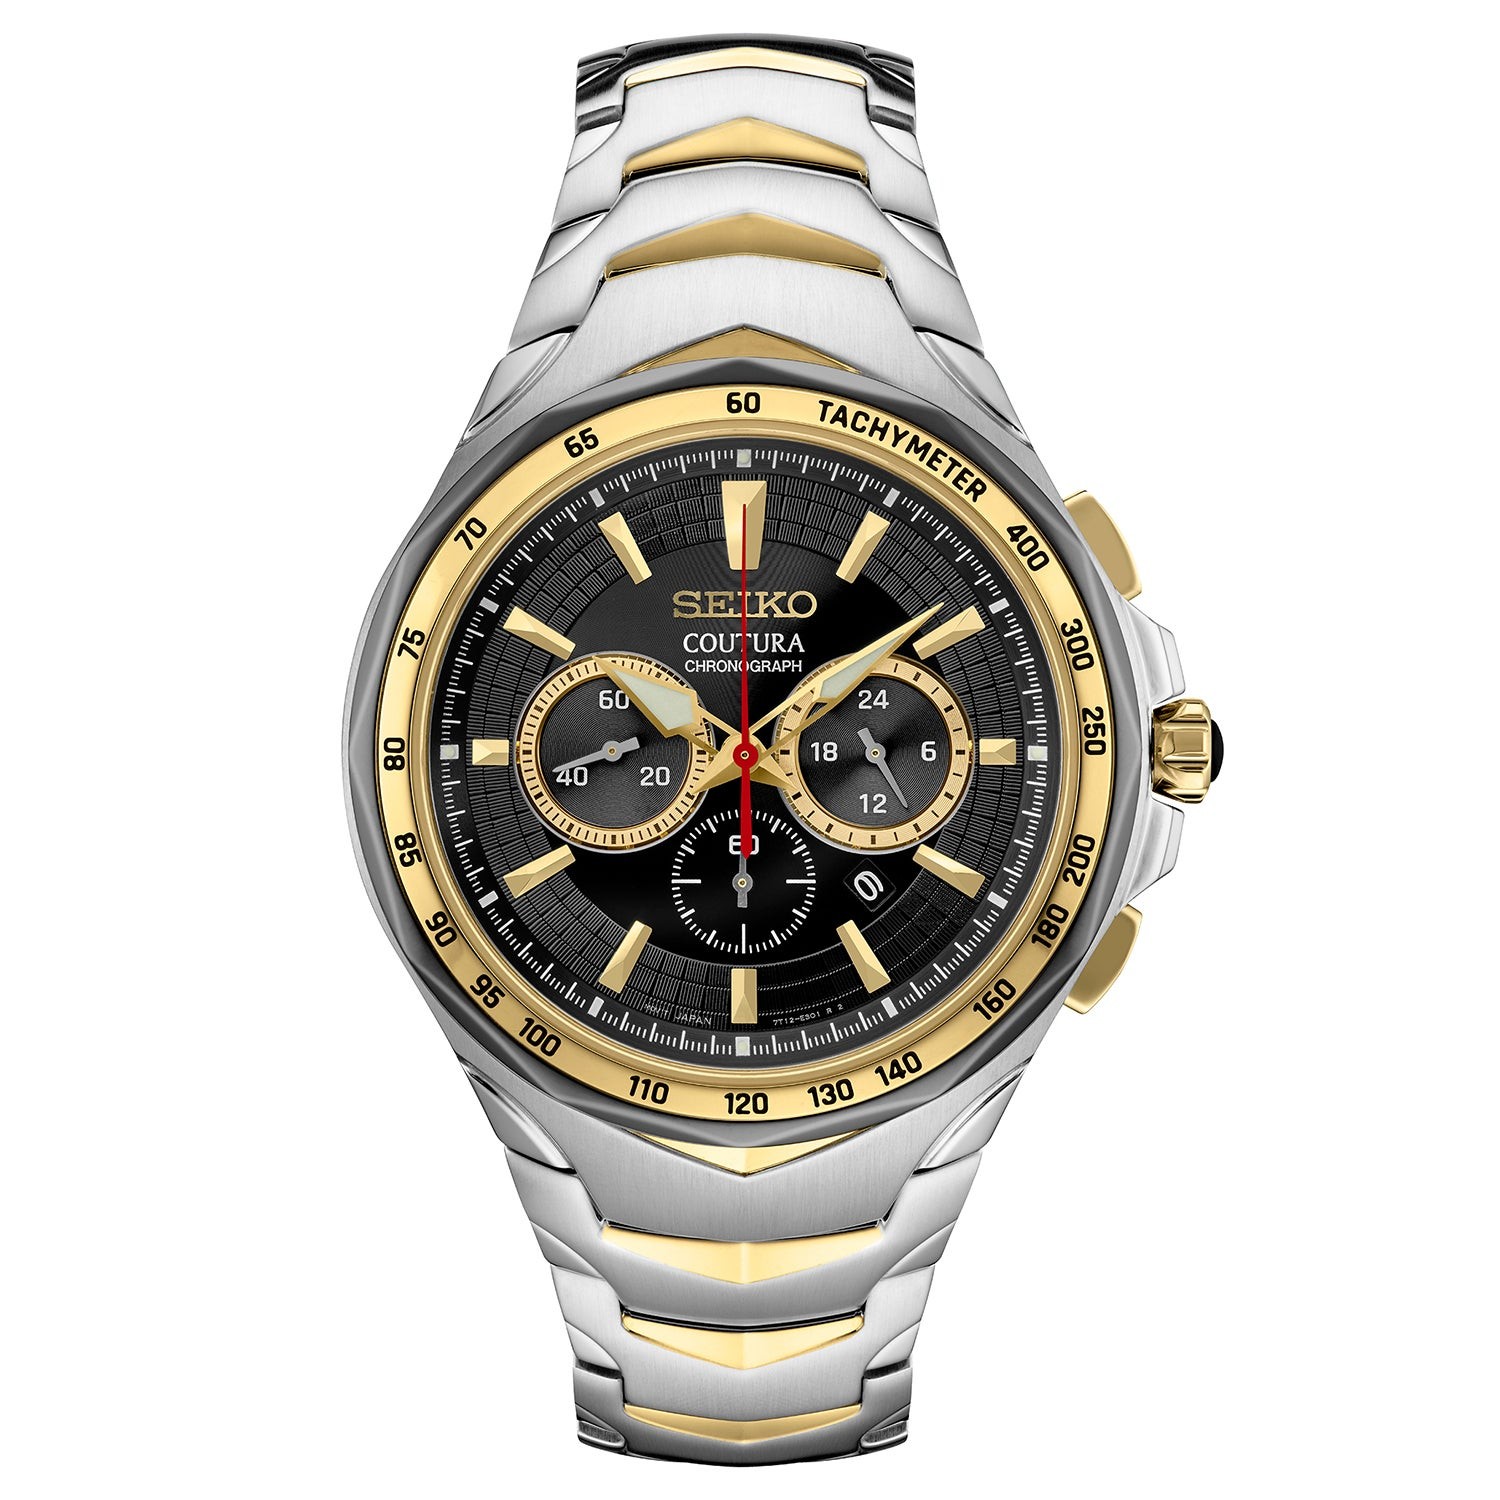 Mens Coutura Chronograph Silver & Gold-Tone Stainless Steel Watch Black Dial